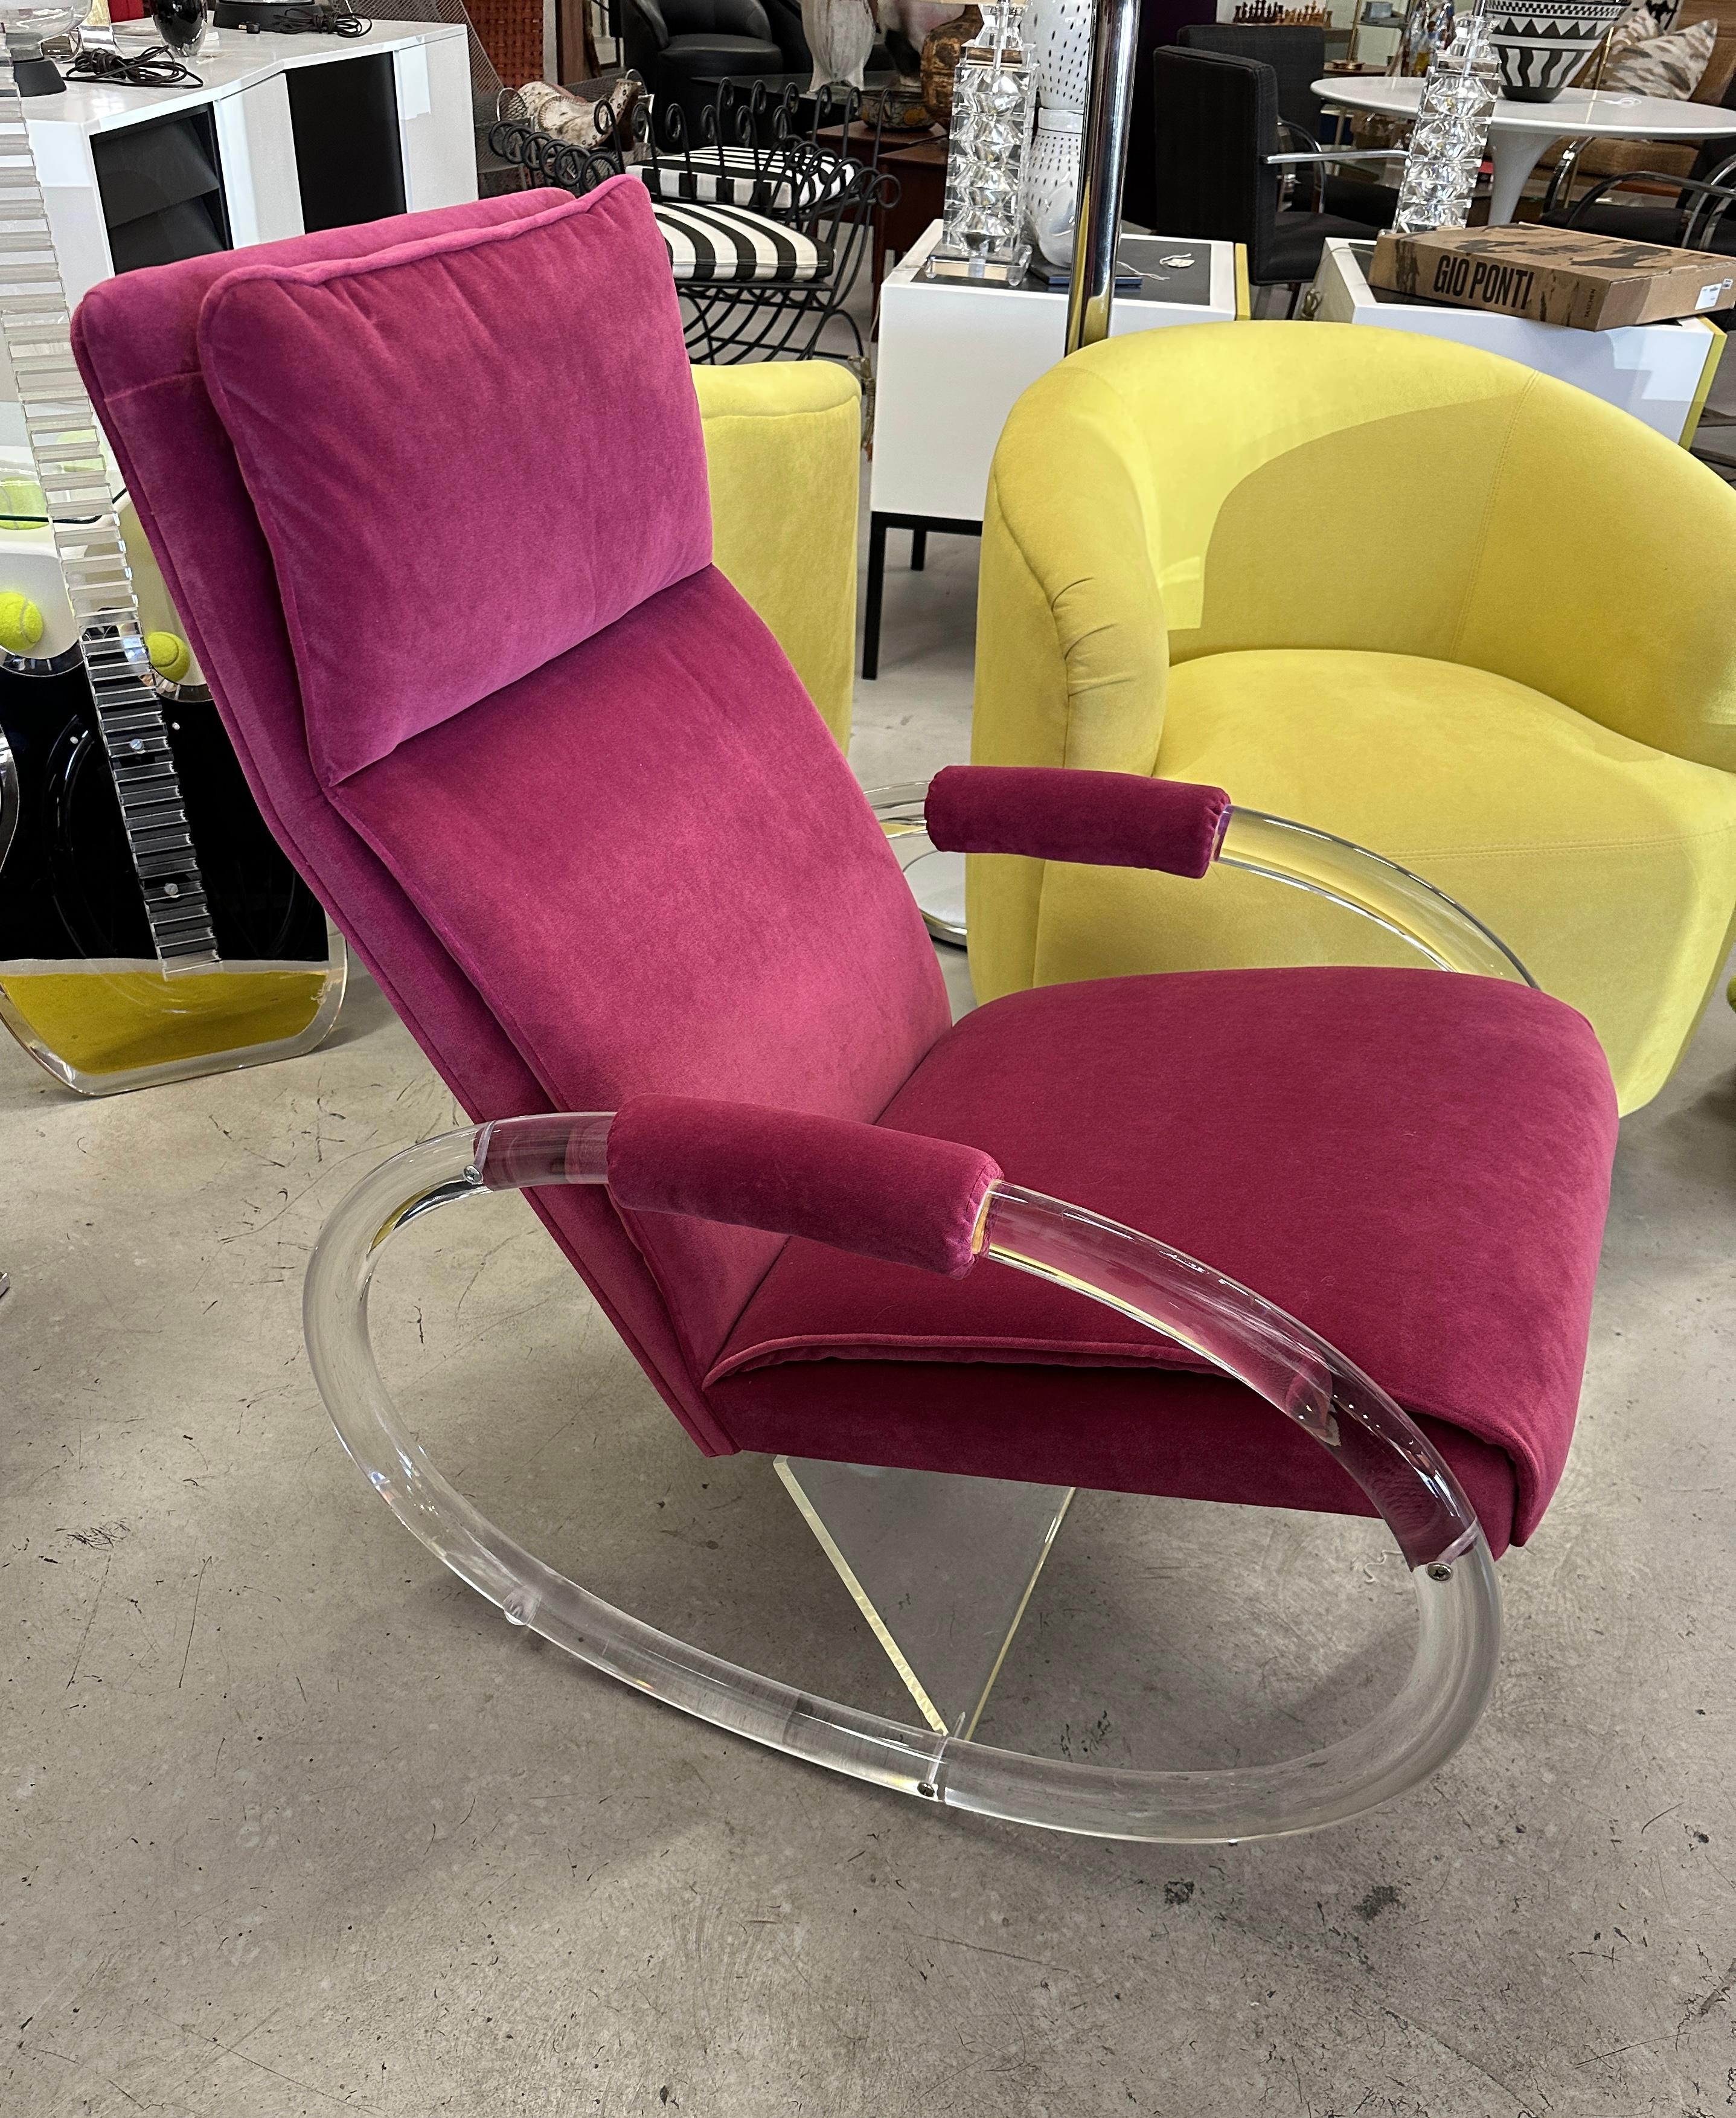 A pretty rocking chair designed by Charles Hollis Jones for Hill manufacturing in the 1970s. It has been beautifully reupholstered in a pink cotton velvet mohair. There are some minor marks and scratches to the lucite shell and bottom support.